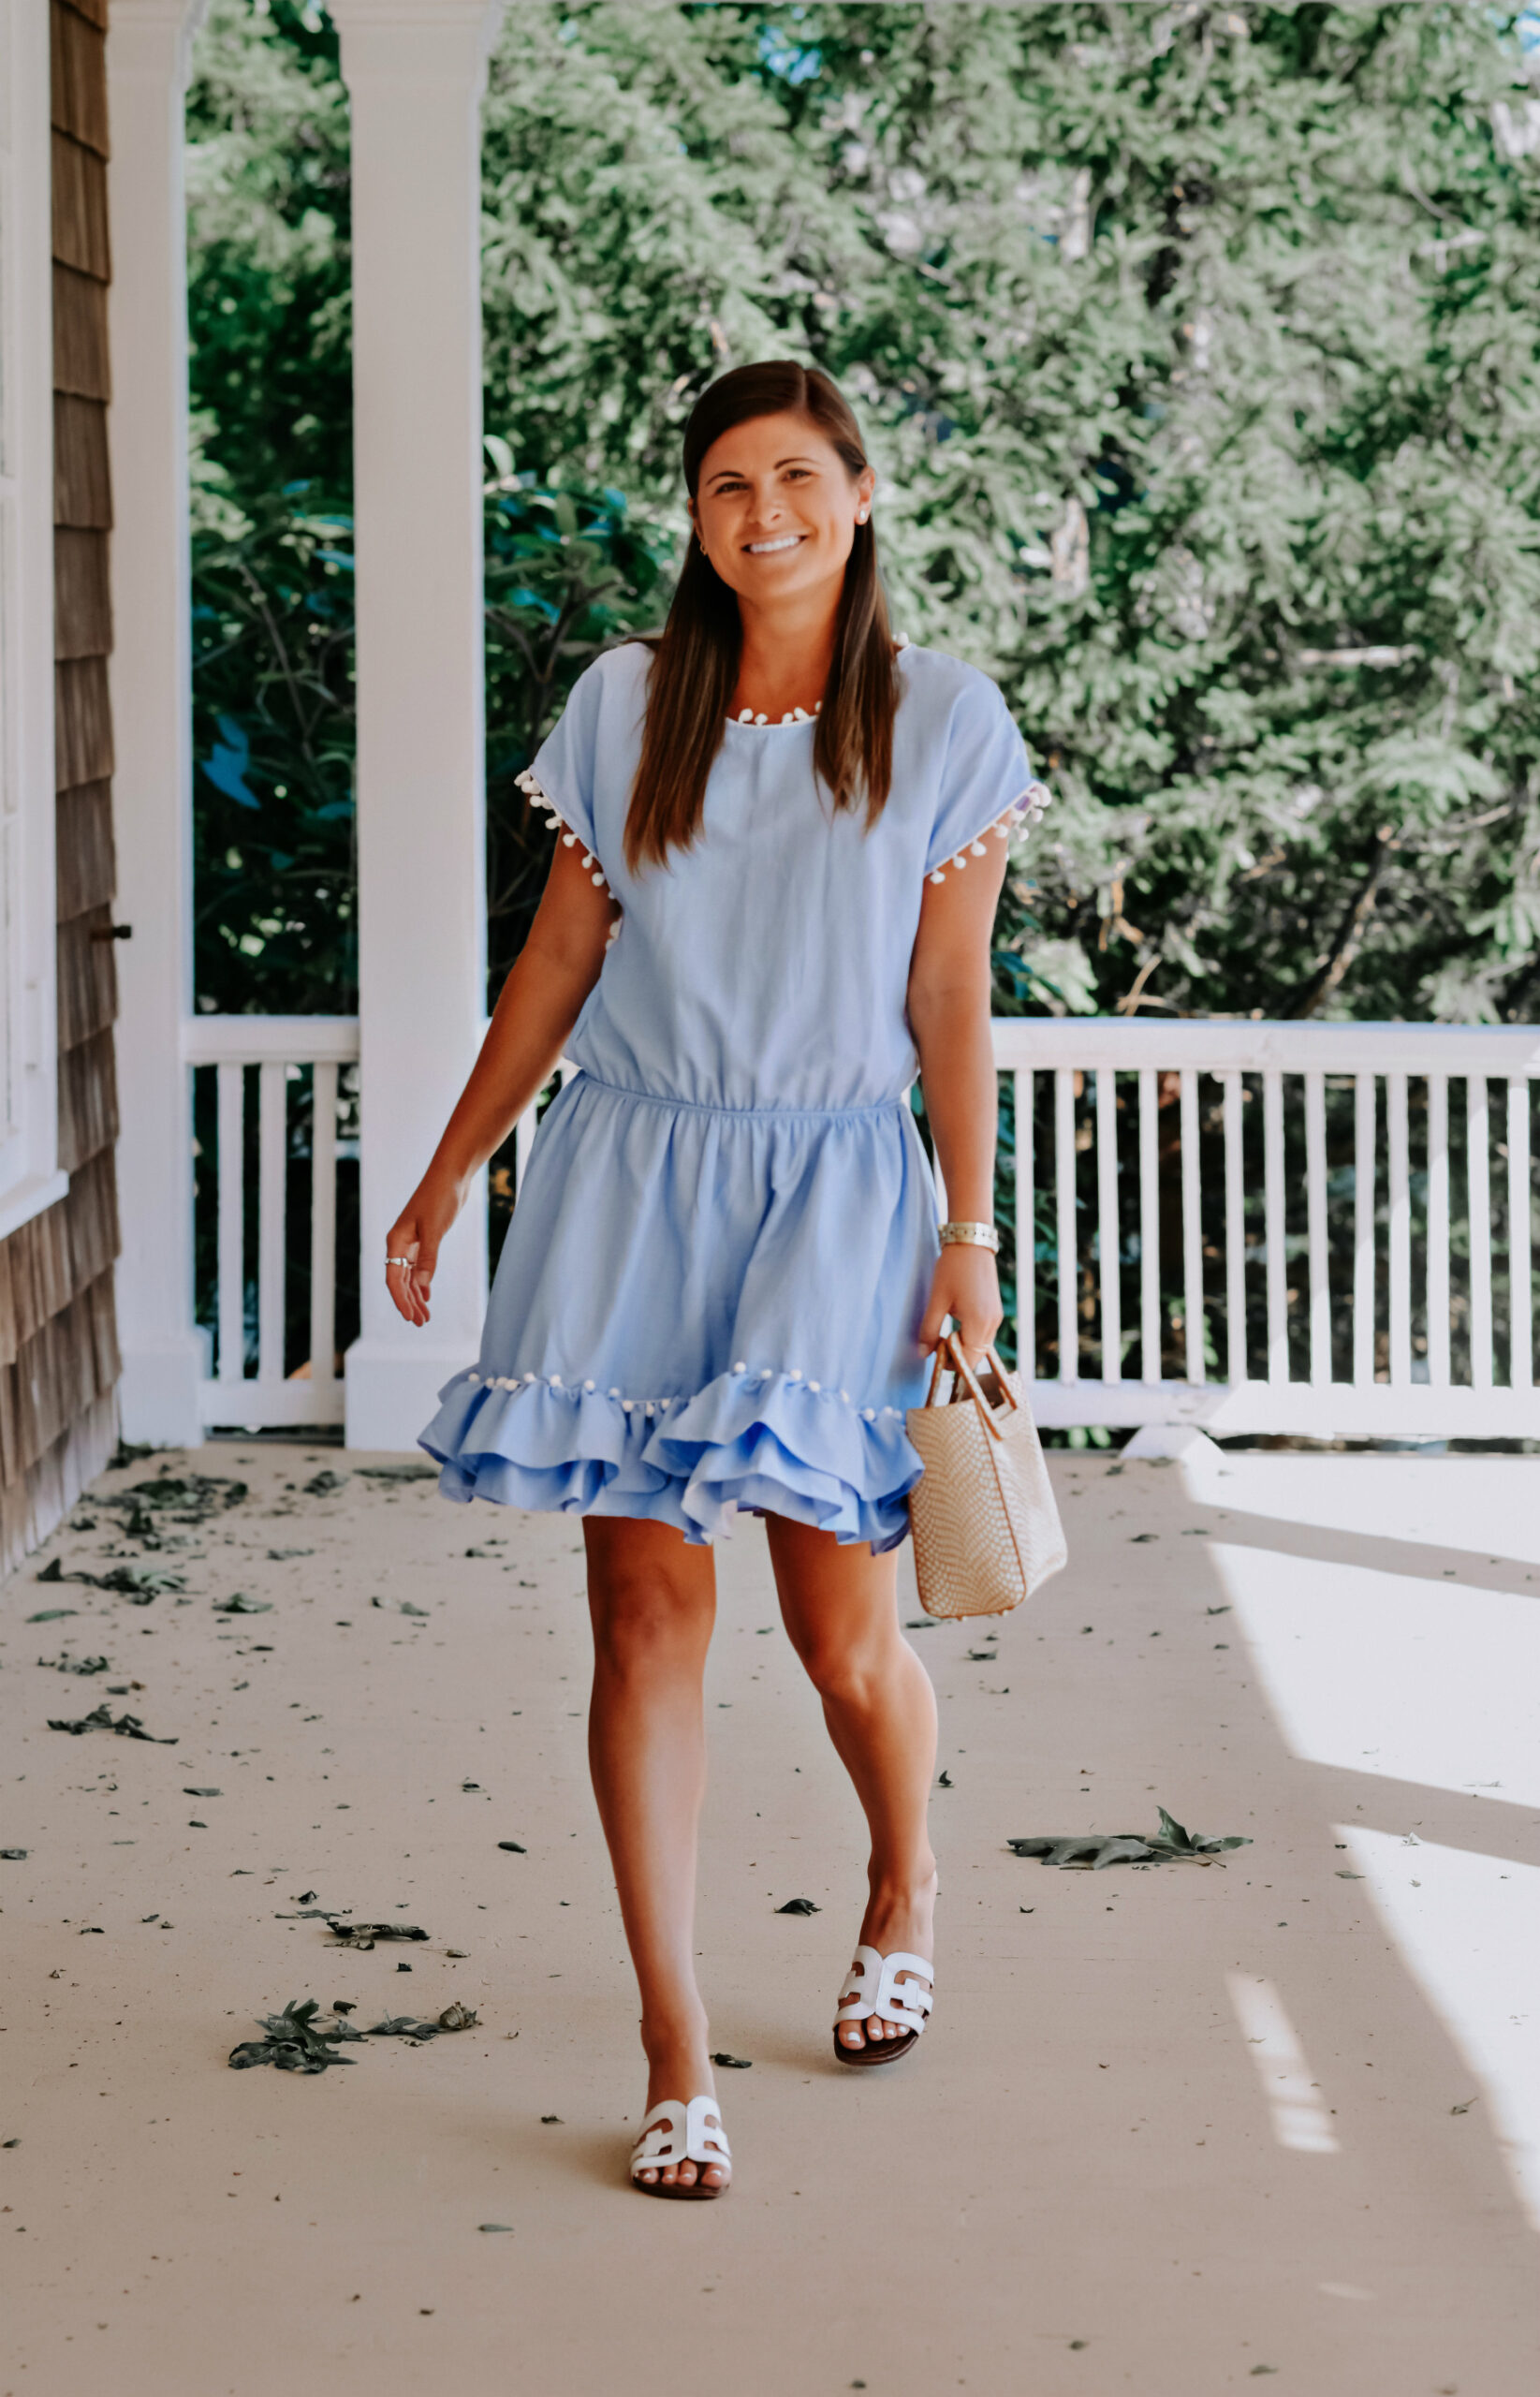 Fun Summer Dresses For Date Night, Summer Date Night Dress, Peixoto Nissi Pom Pom Dress, The American Weekend Society Ivy League Bow Hair Clip, Sam Edelman Bay Slide Sandal, Tilden of To Be Bright